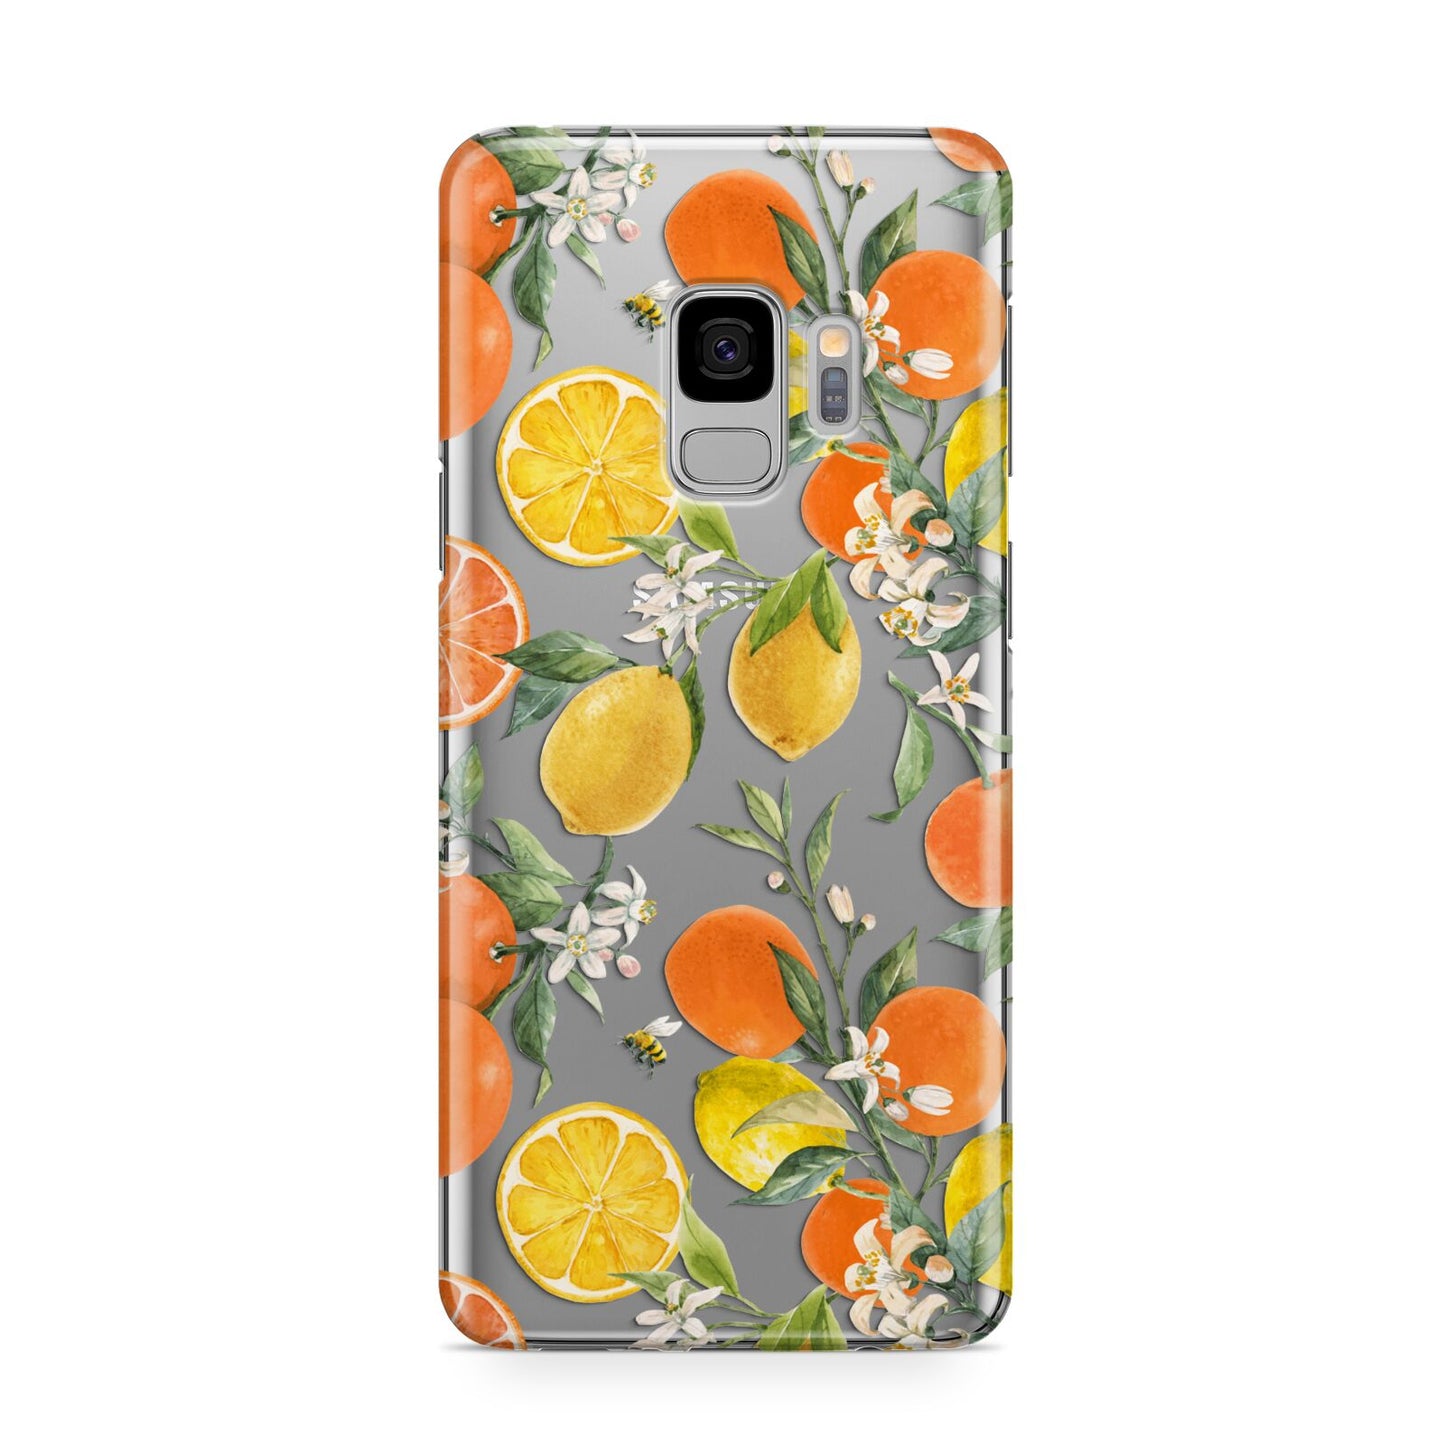 Lemons and Oranges Samsung Galaxy S9 Case